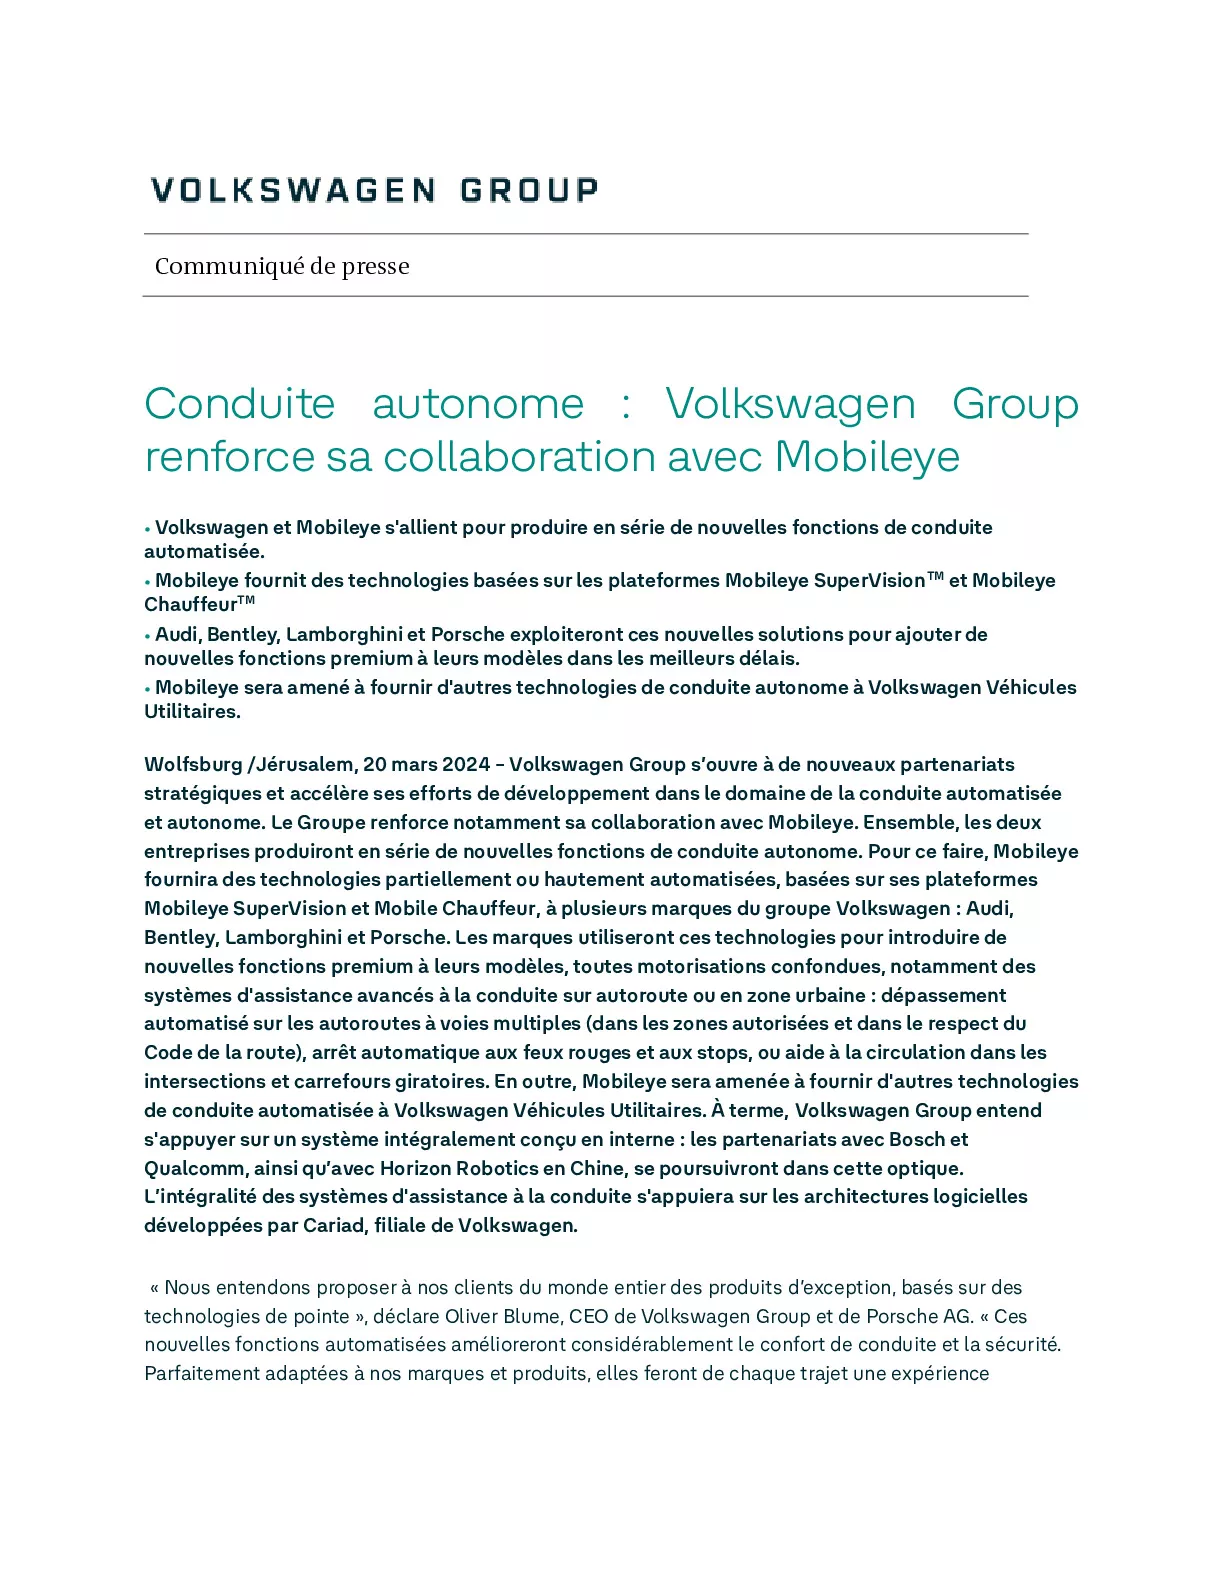 Automated driving_Volkswagen Group intensifies collaboration with Mobileye_FR-pdf